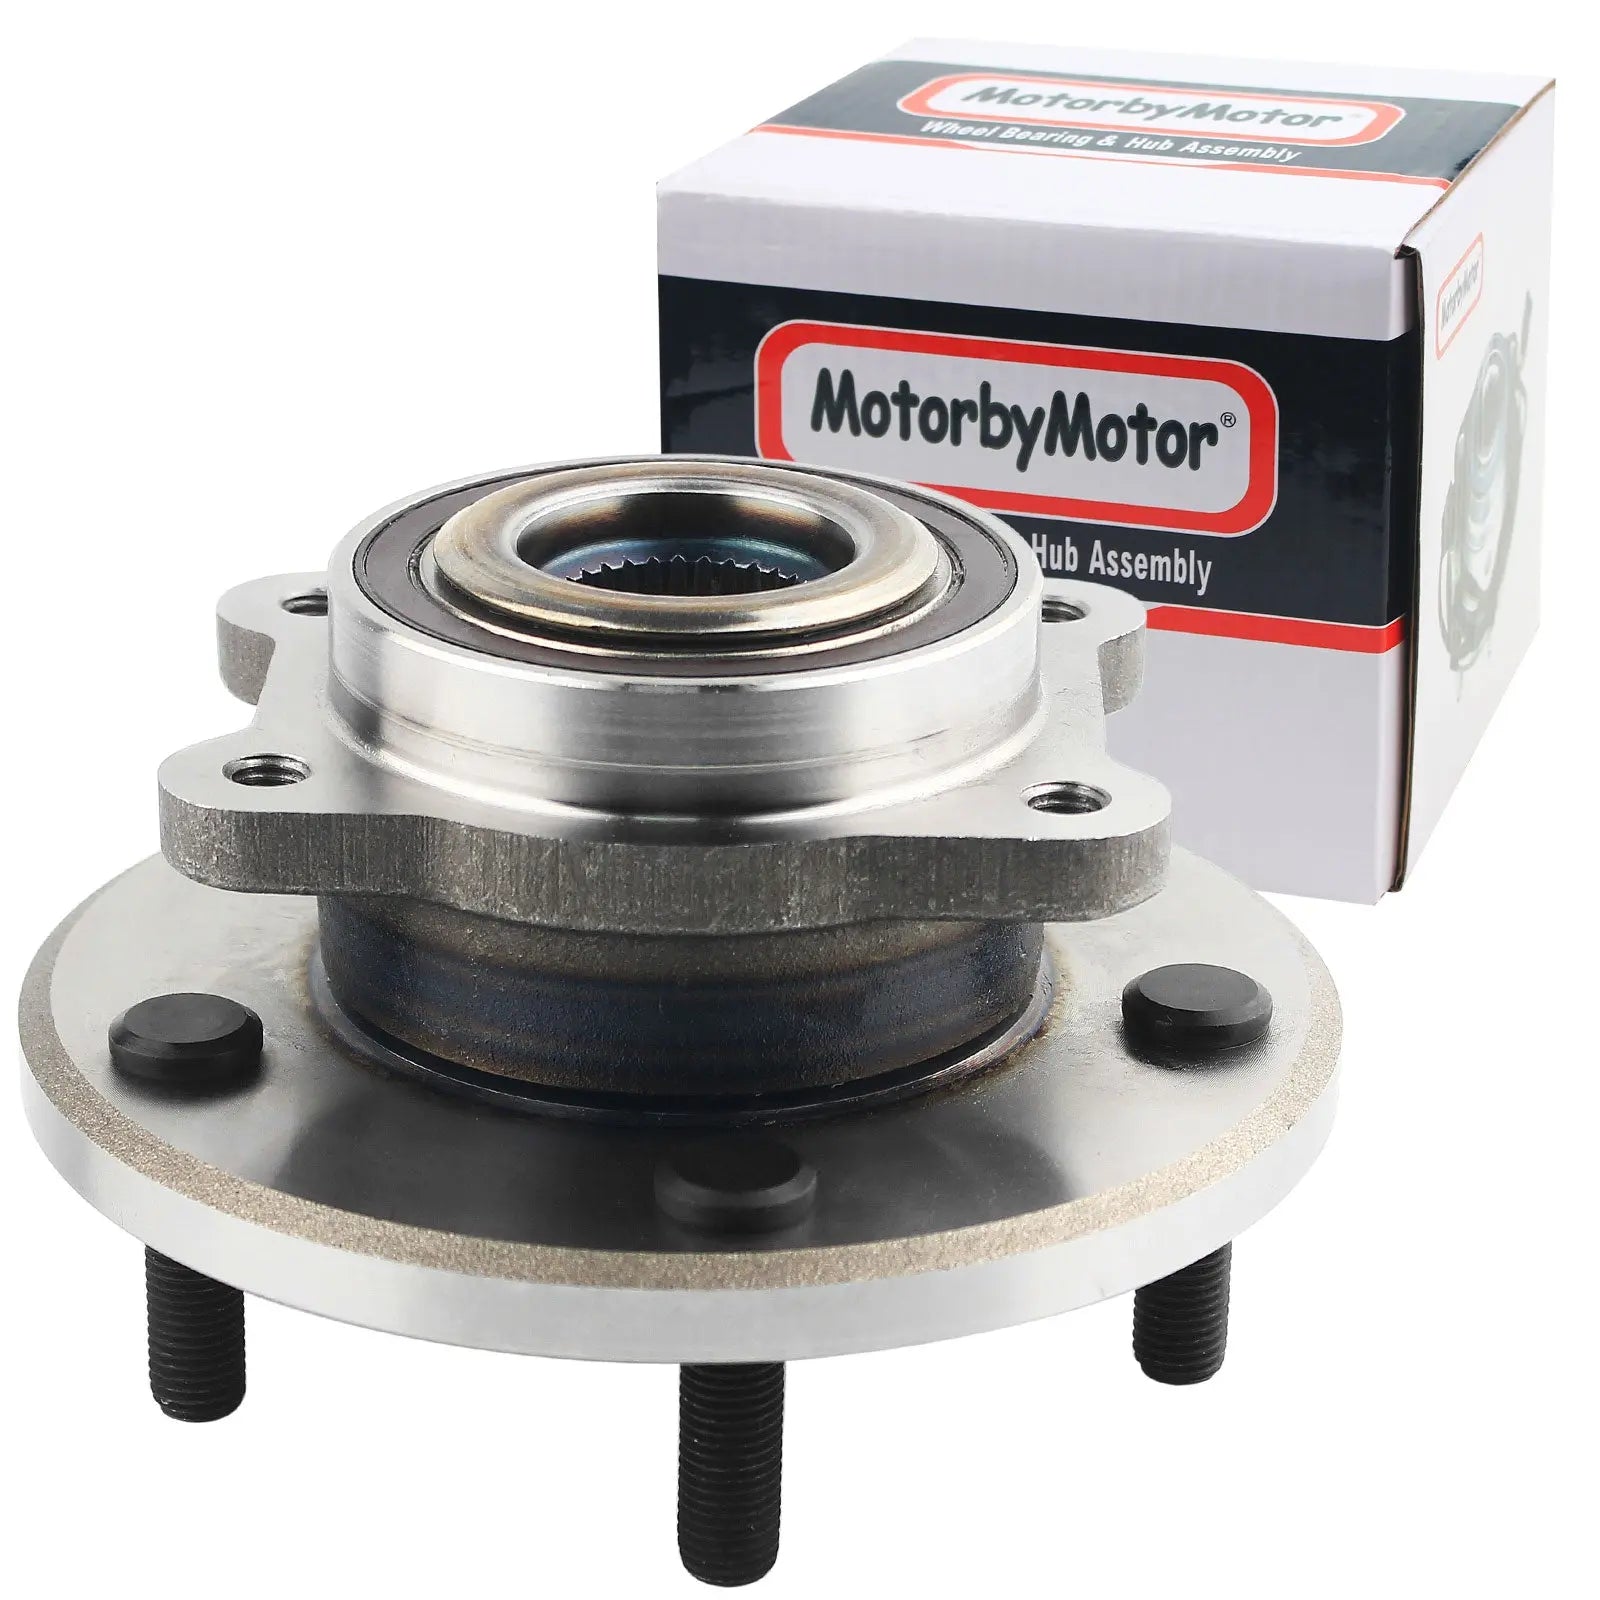 MotorbyMotor 513286 Front Wheel Bearing and Hub Assembly with 5 Lugs fits for Dodge Journey Low-Runout OE Directly Replacement Hub Bearing w/ABS MotorbyMotor